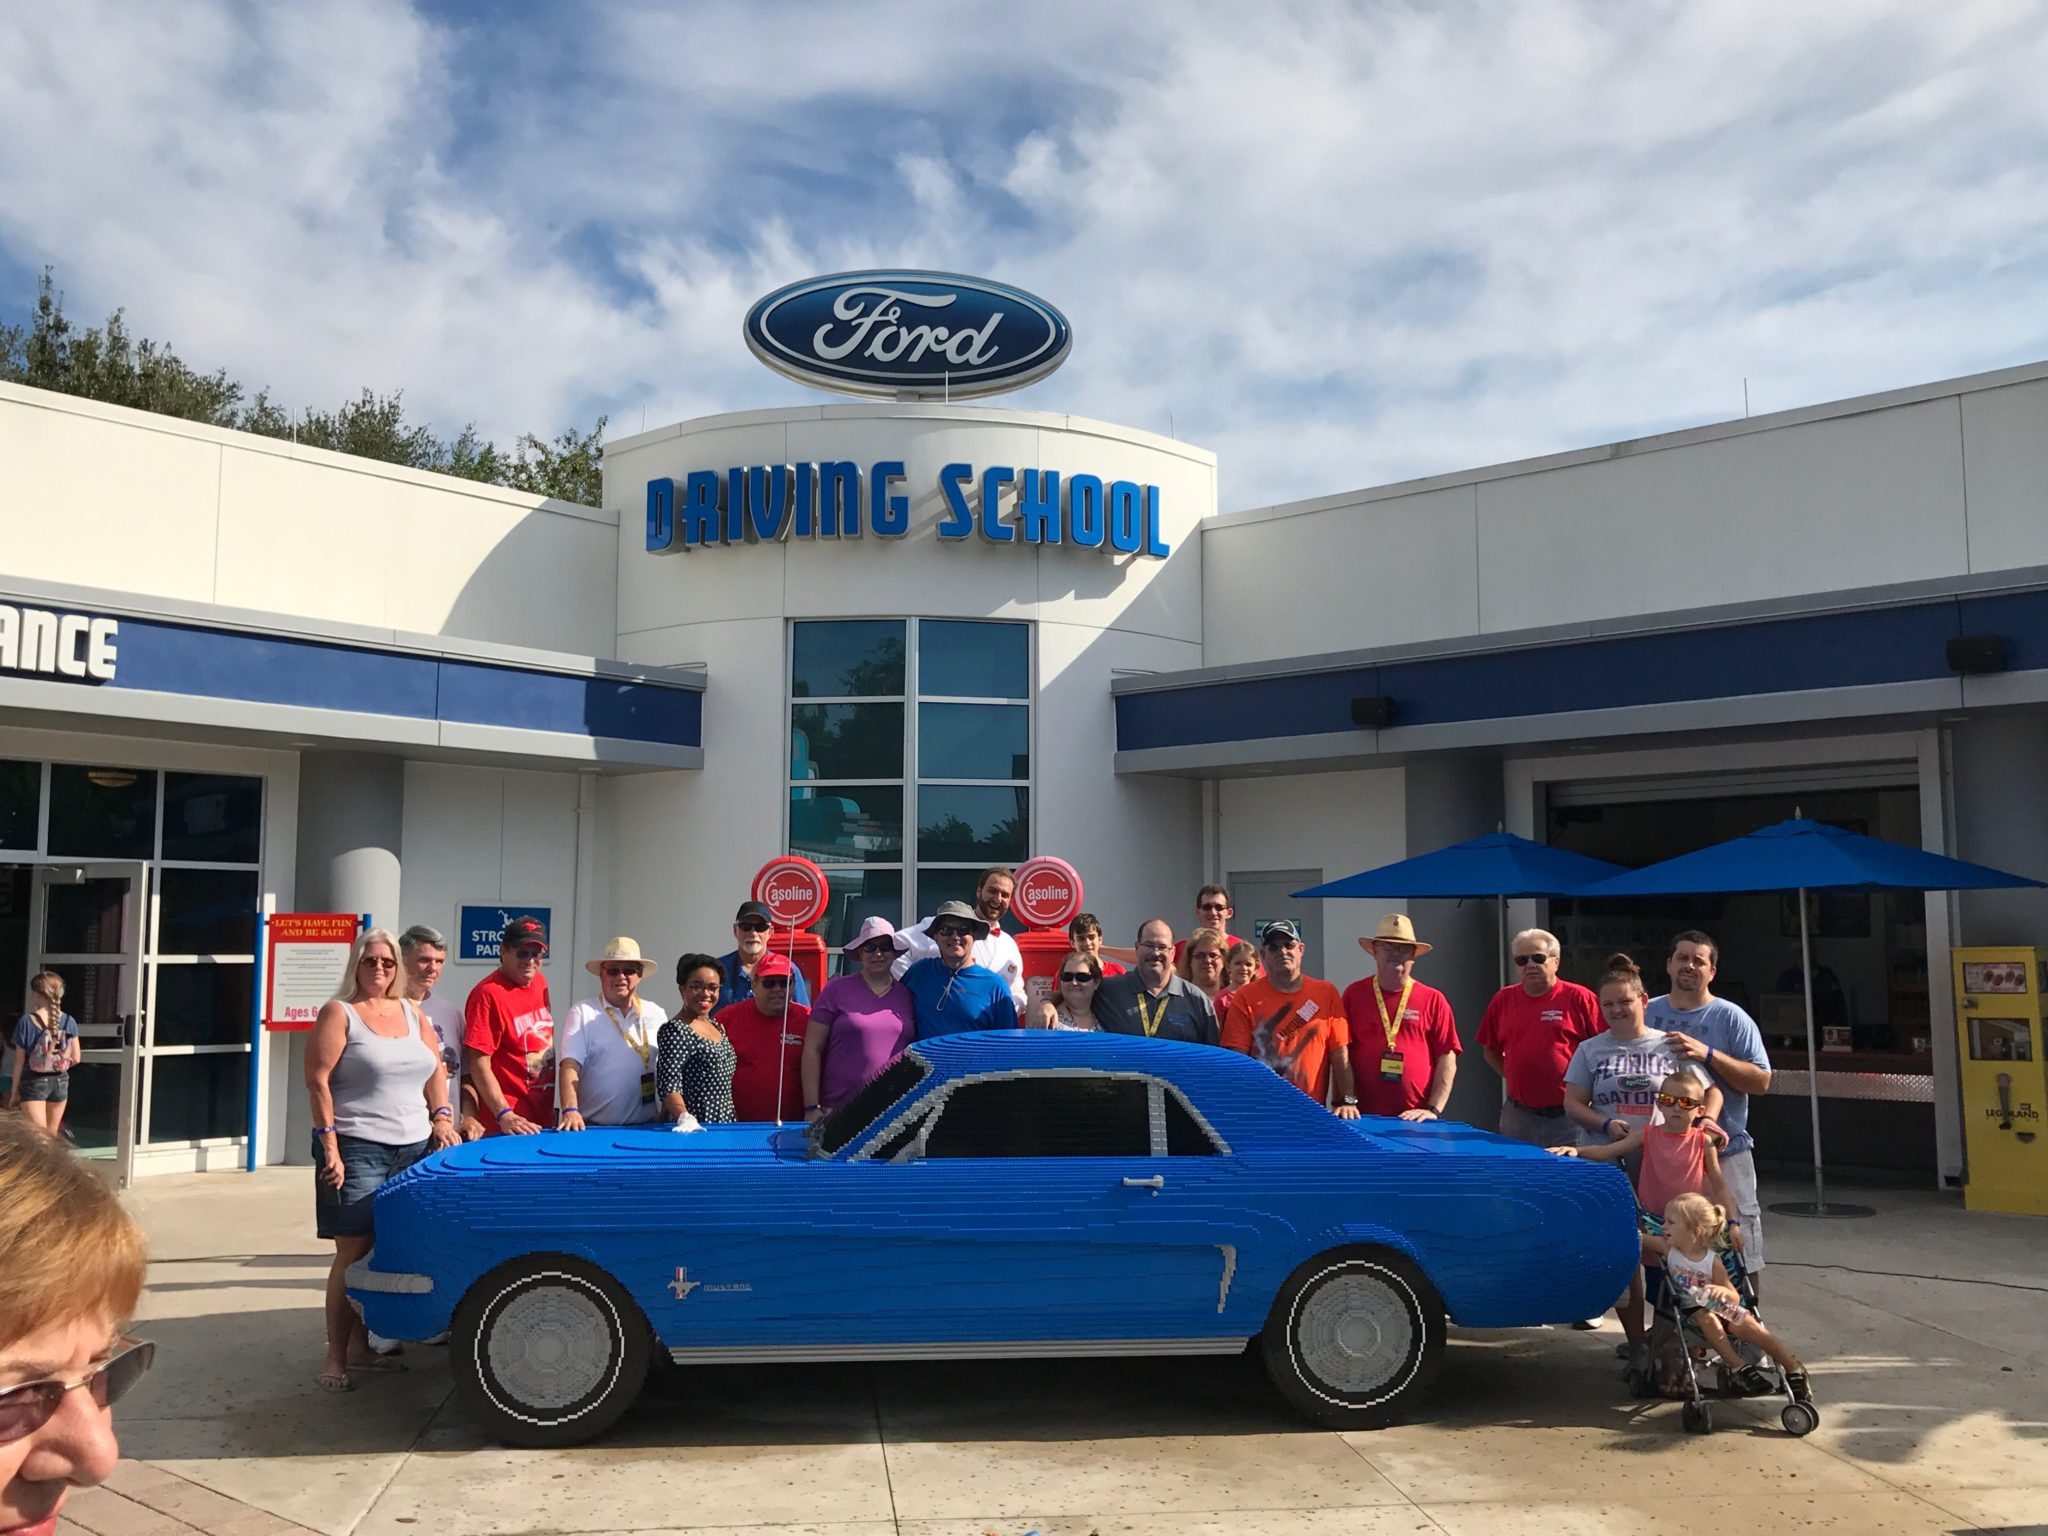 LEGOLAND Florida reveals the new “1964½” Ford Mustang Lego display!